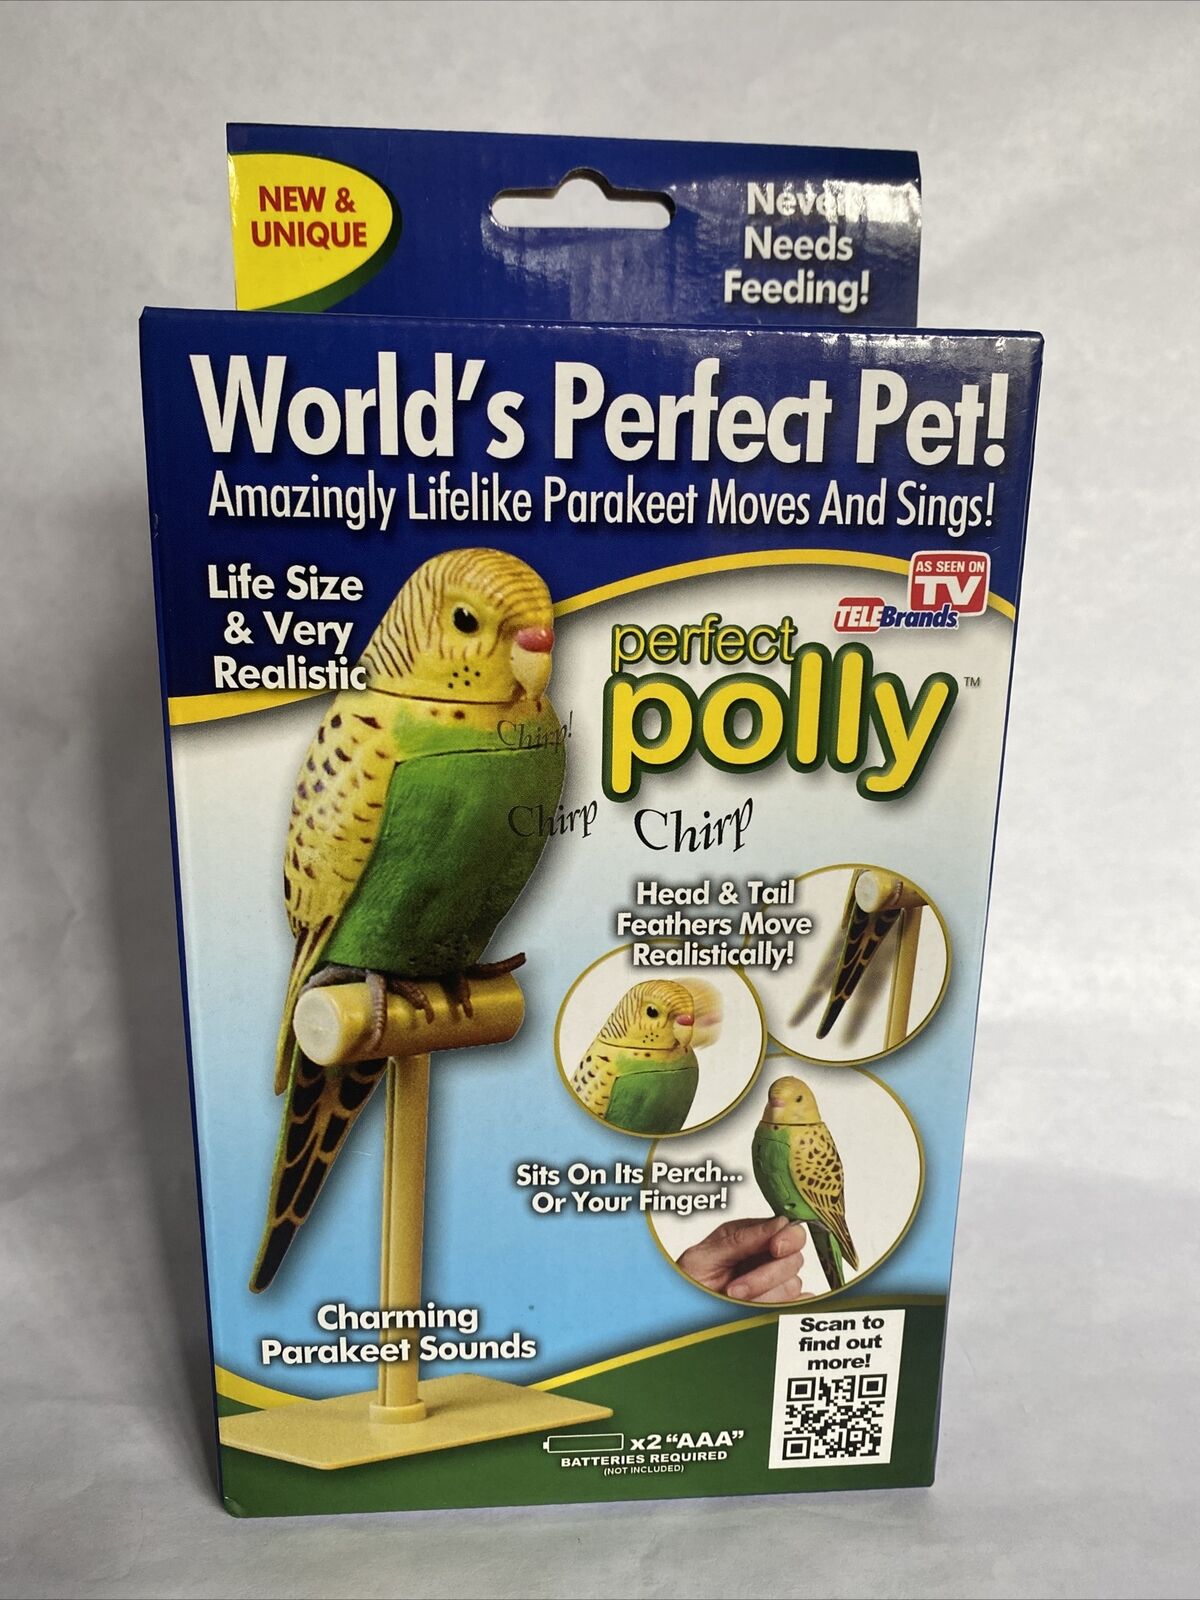 World's Perfect Polly Parakeet Pet Bird Moves & Sings As Seen On Tv Telebrands